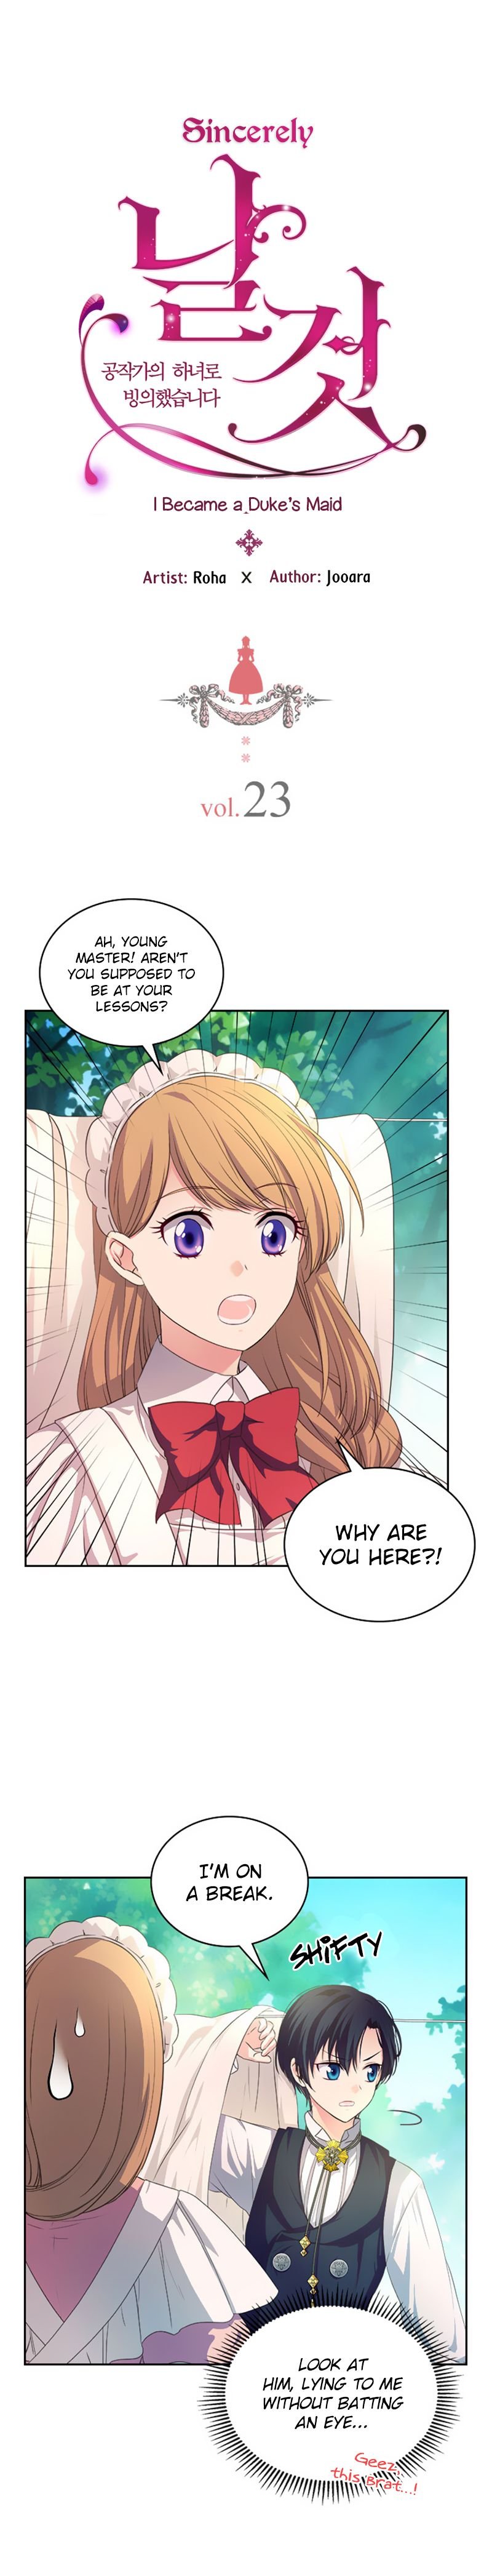 Sincerely: I Became a Duke’s Maid Chapter 23 - Page 2